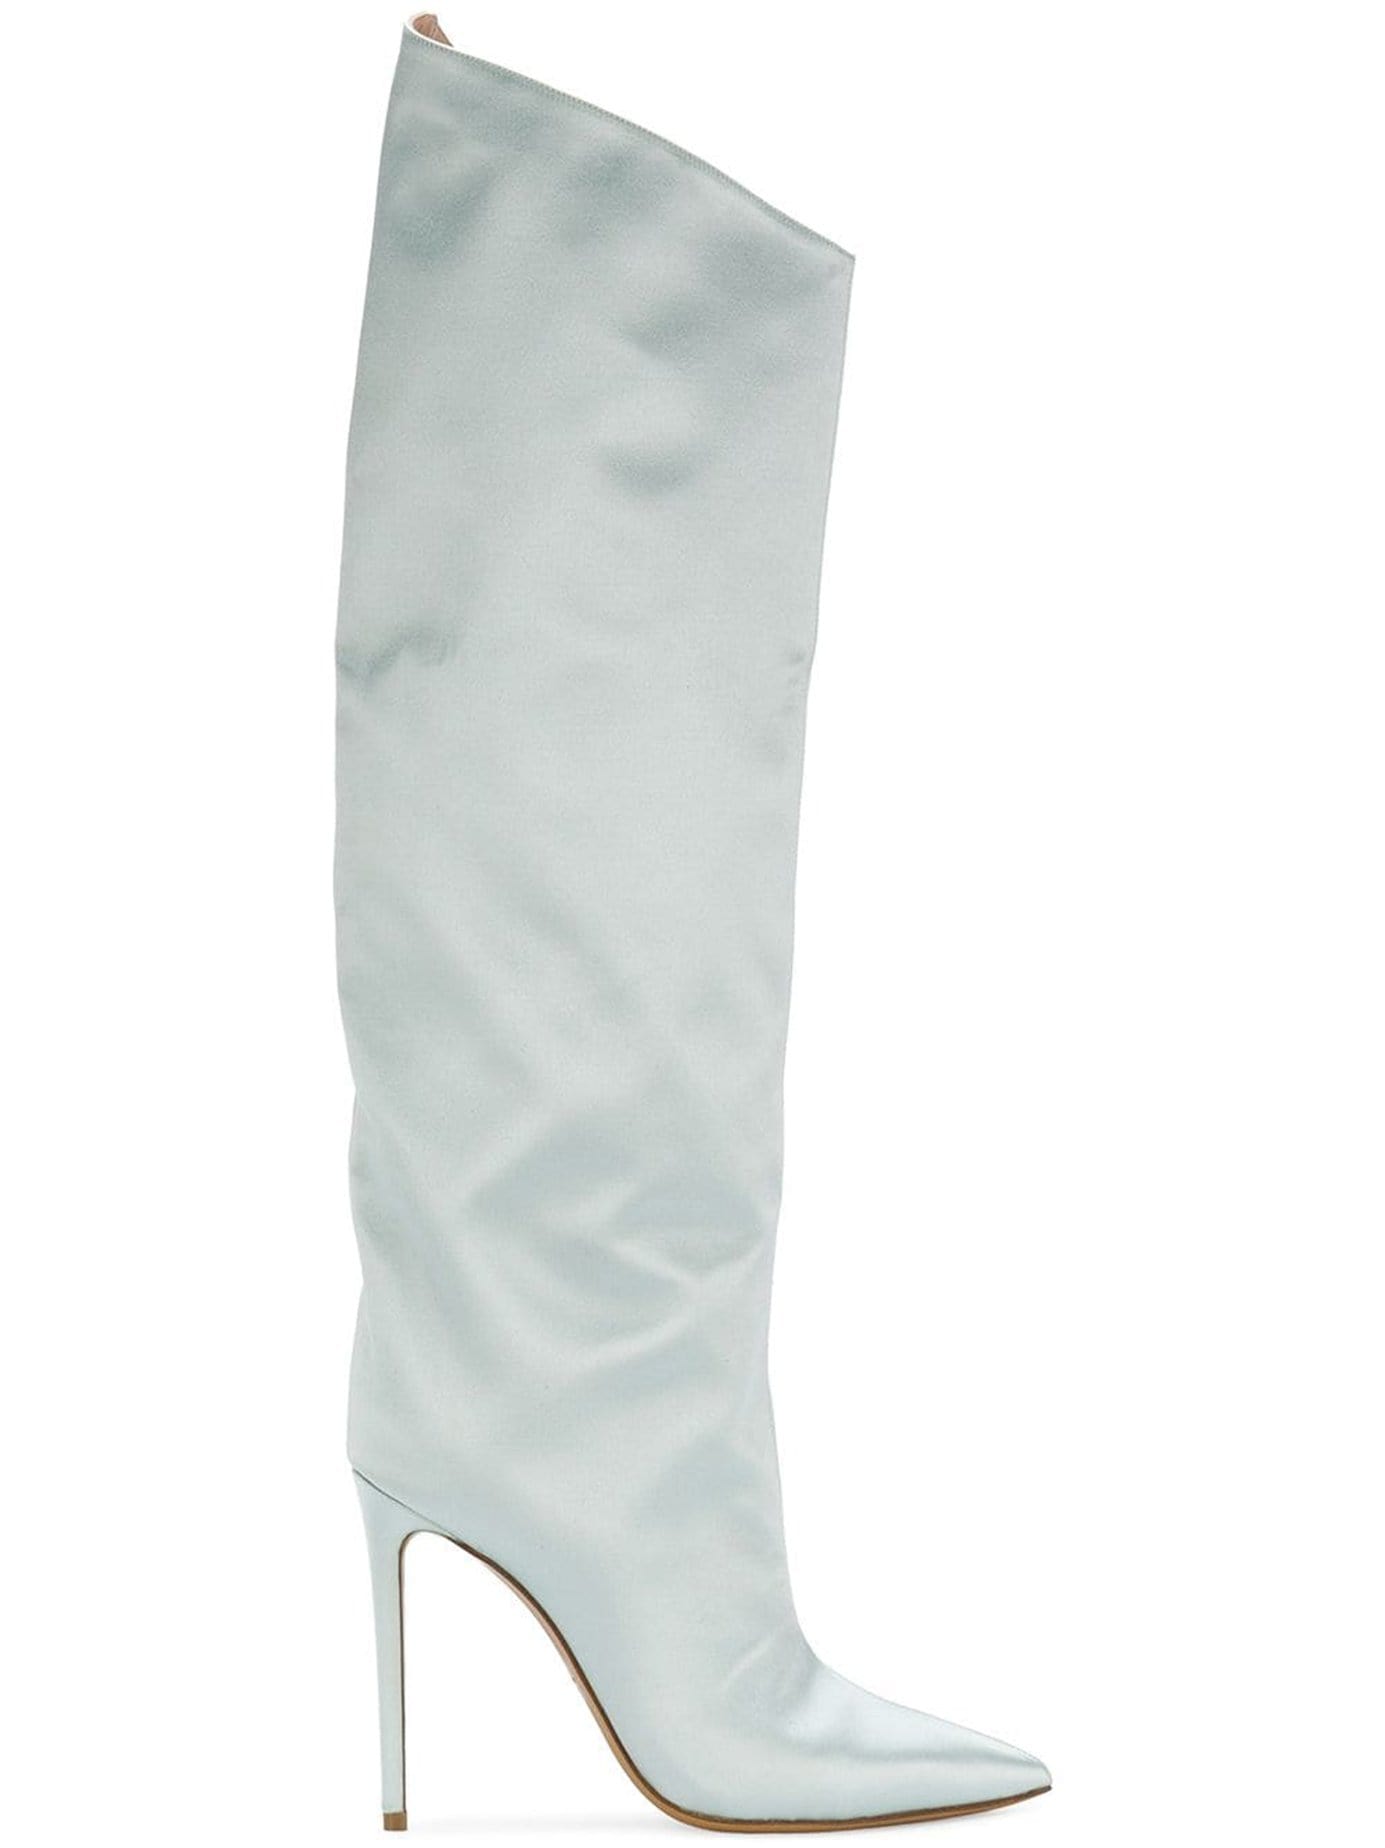 Patent Leather Boots in White